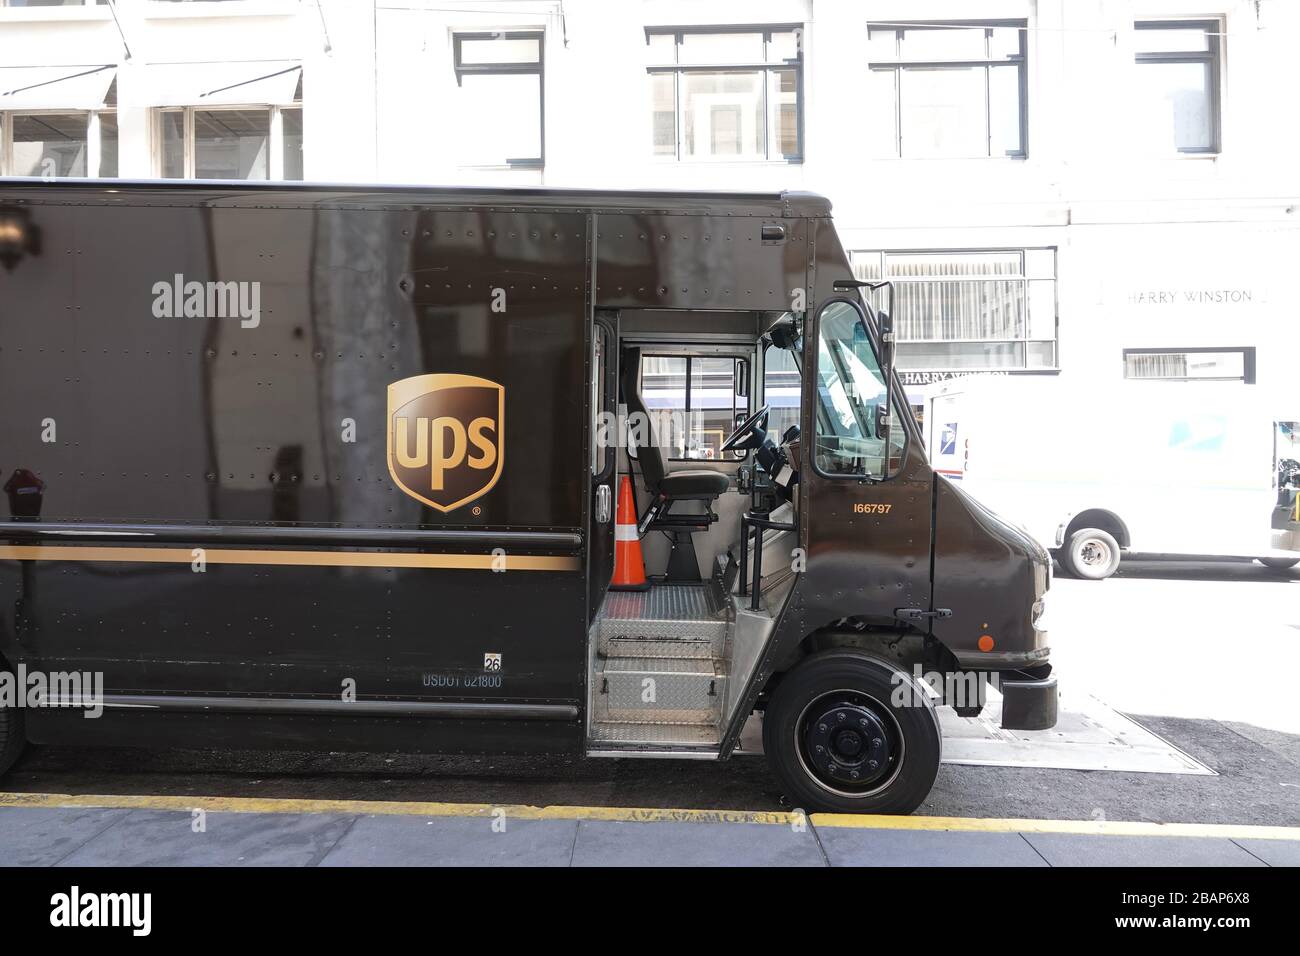 UPS truck parked on a San Francisco street; August 2018 Stock Photo